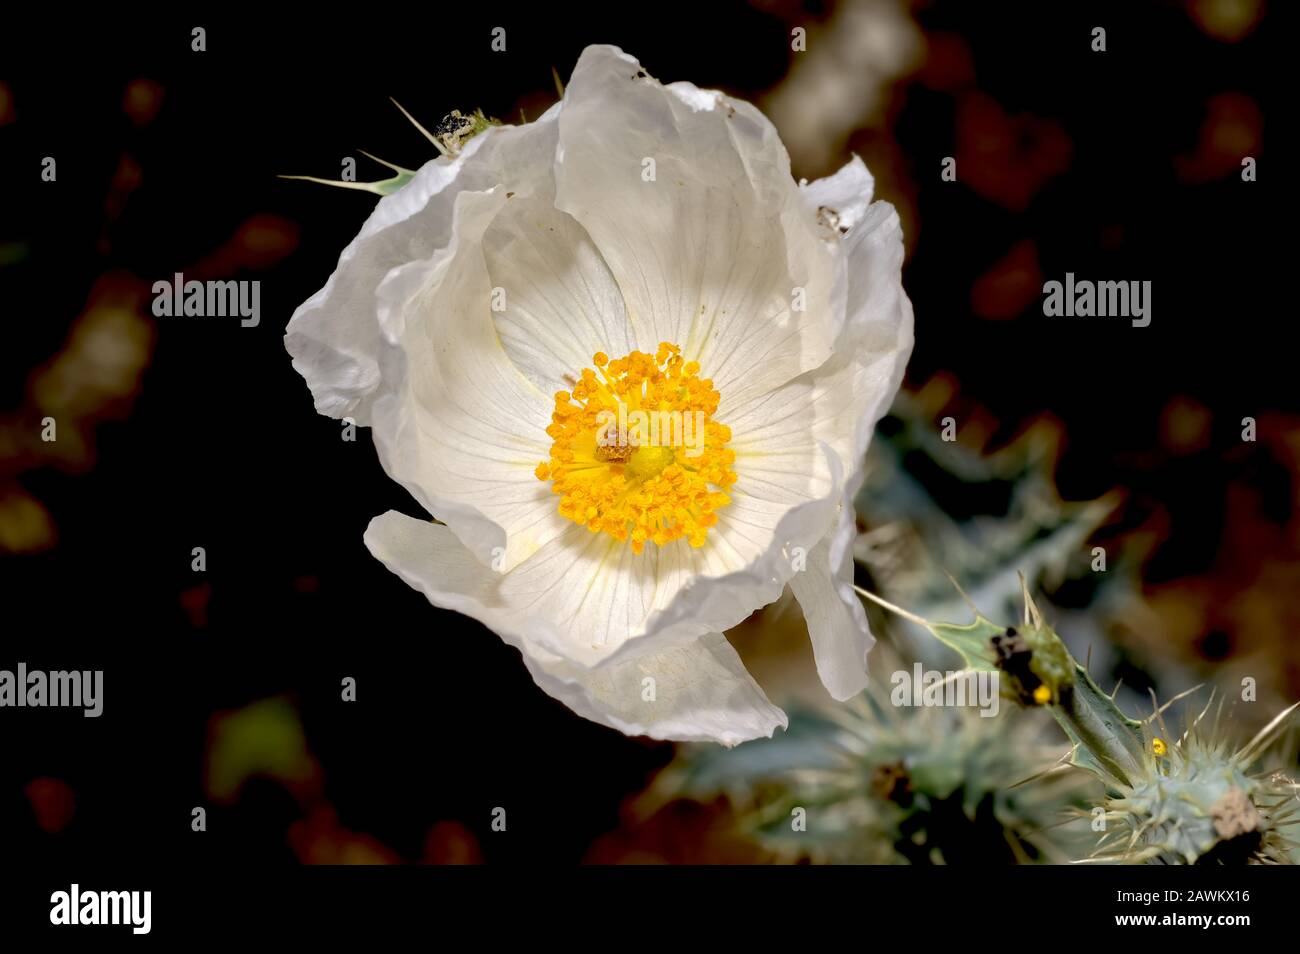 The white flower of the Southwestern Prickle Poppy. This noxious weed grows wild in many parts of the American Southwest, including Arizona. It gets i Stock Photo